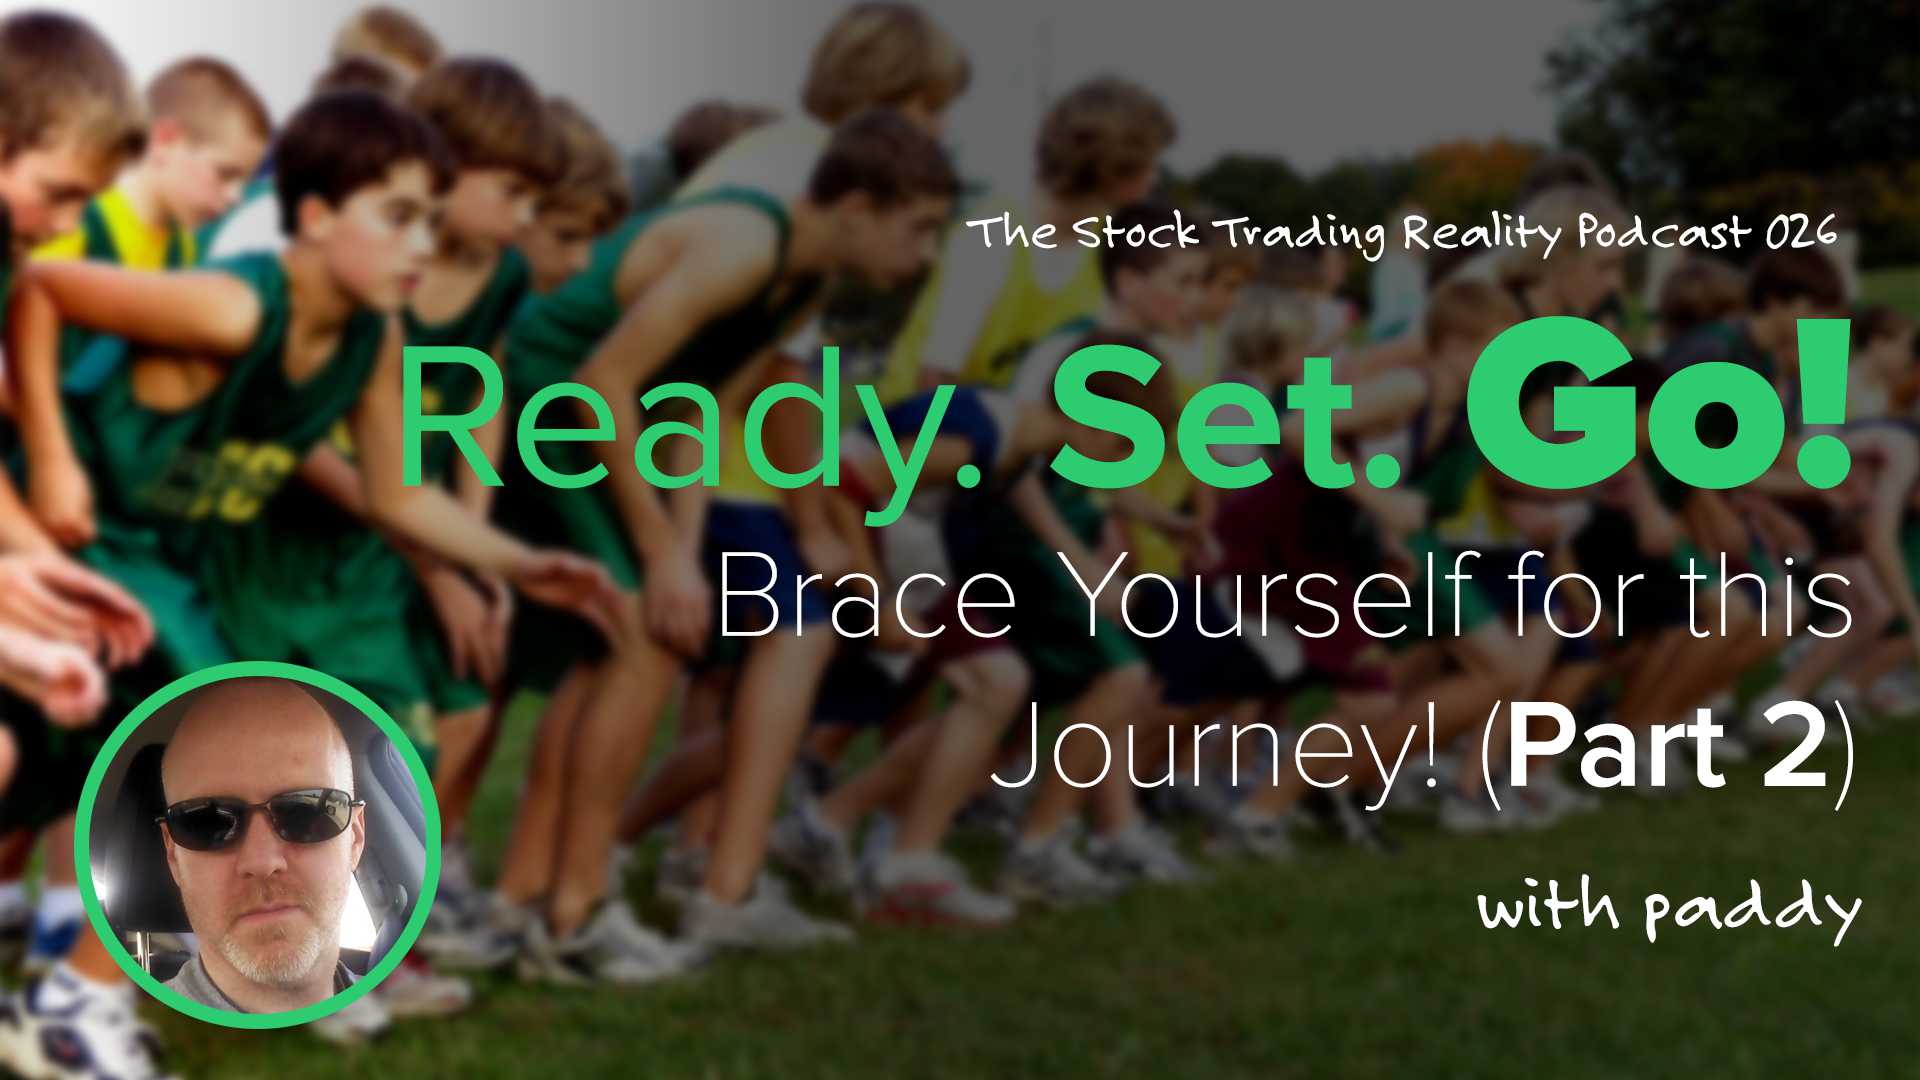 STR 026: Ready. Set. Go! Brace Yourself for this Journey! Part 2